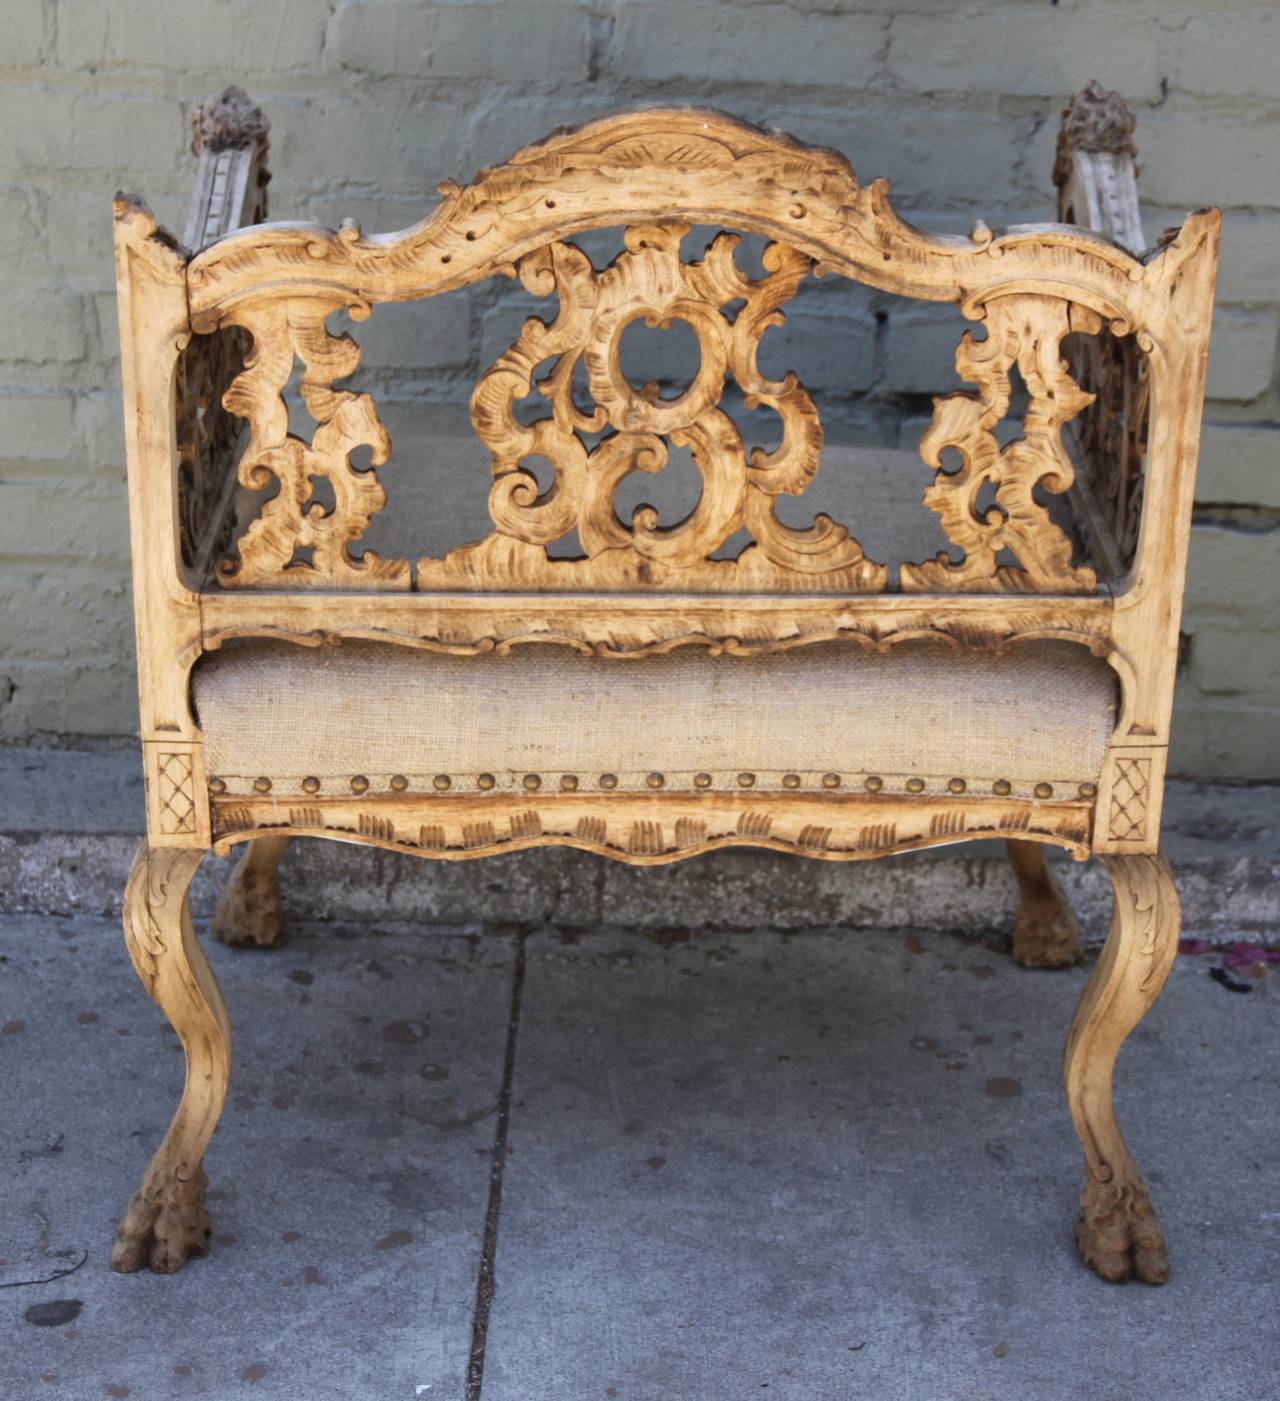 19th Century Italian Carved Bench with Cherub Faces 3